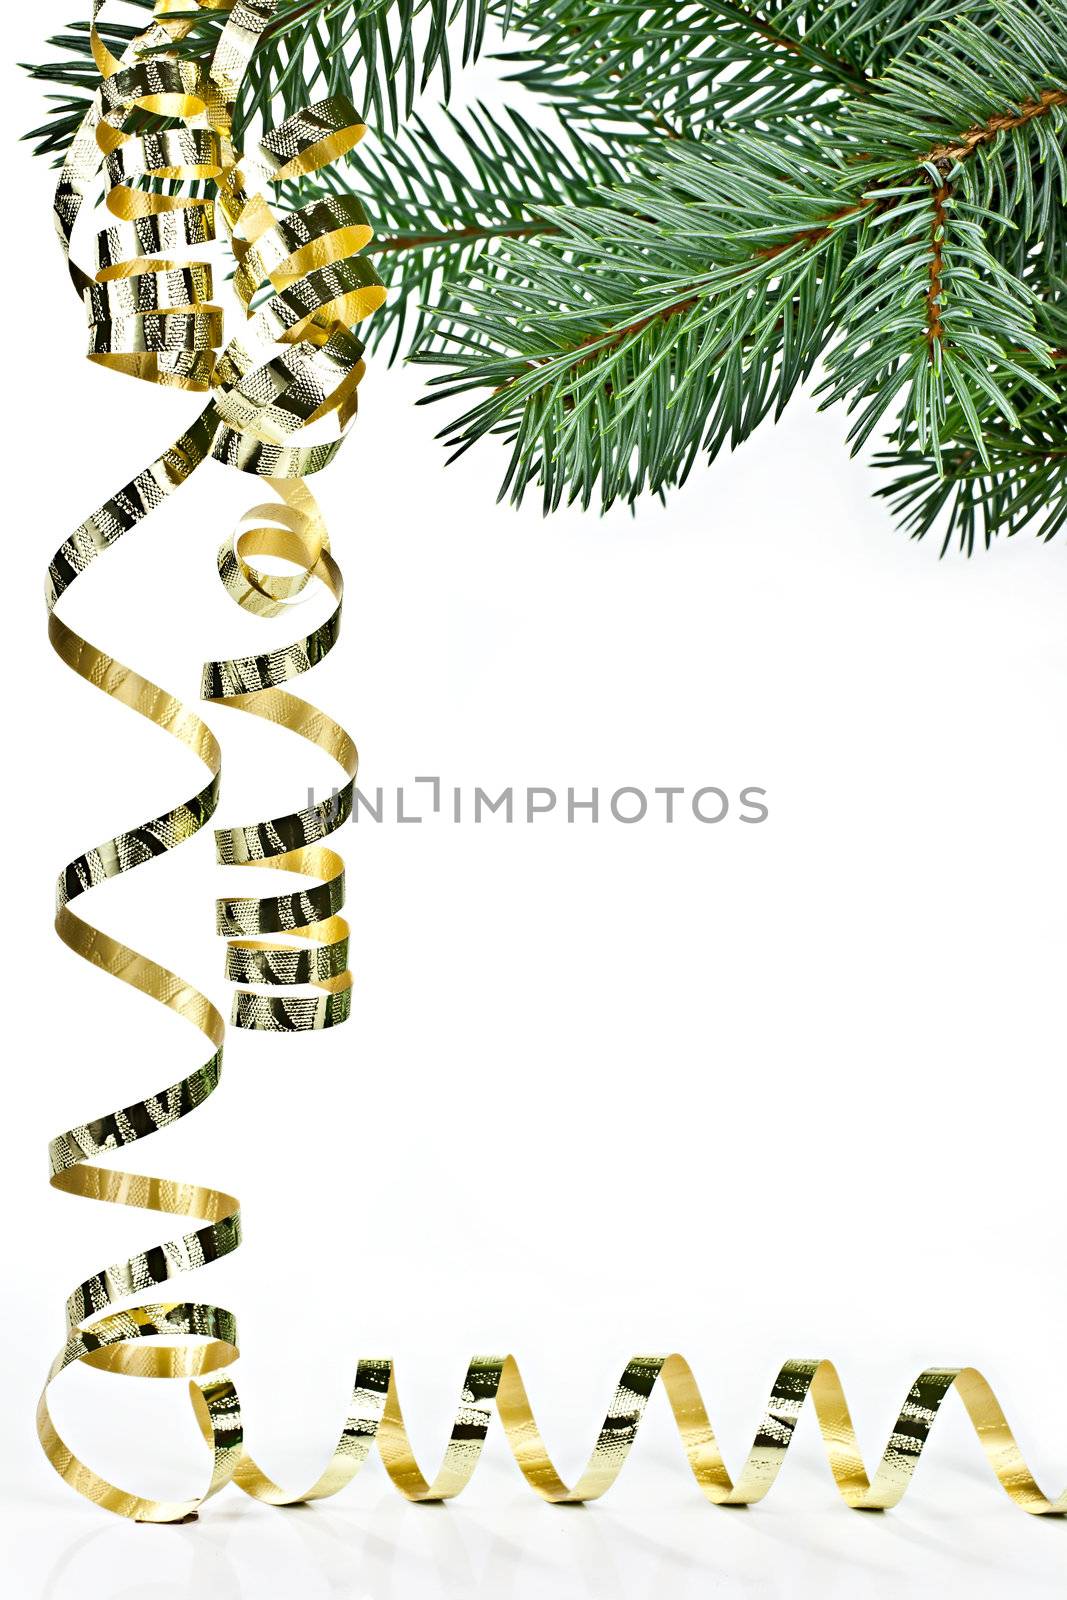 Isolated on a white background spruce twig, the Christmas Streamer.

